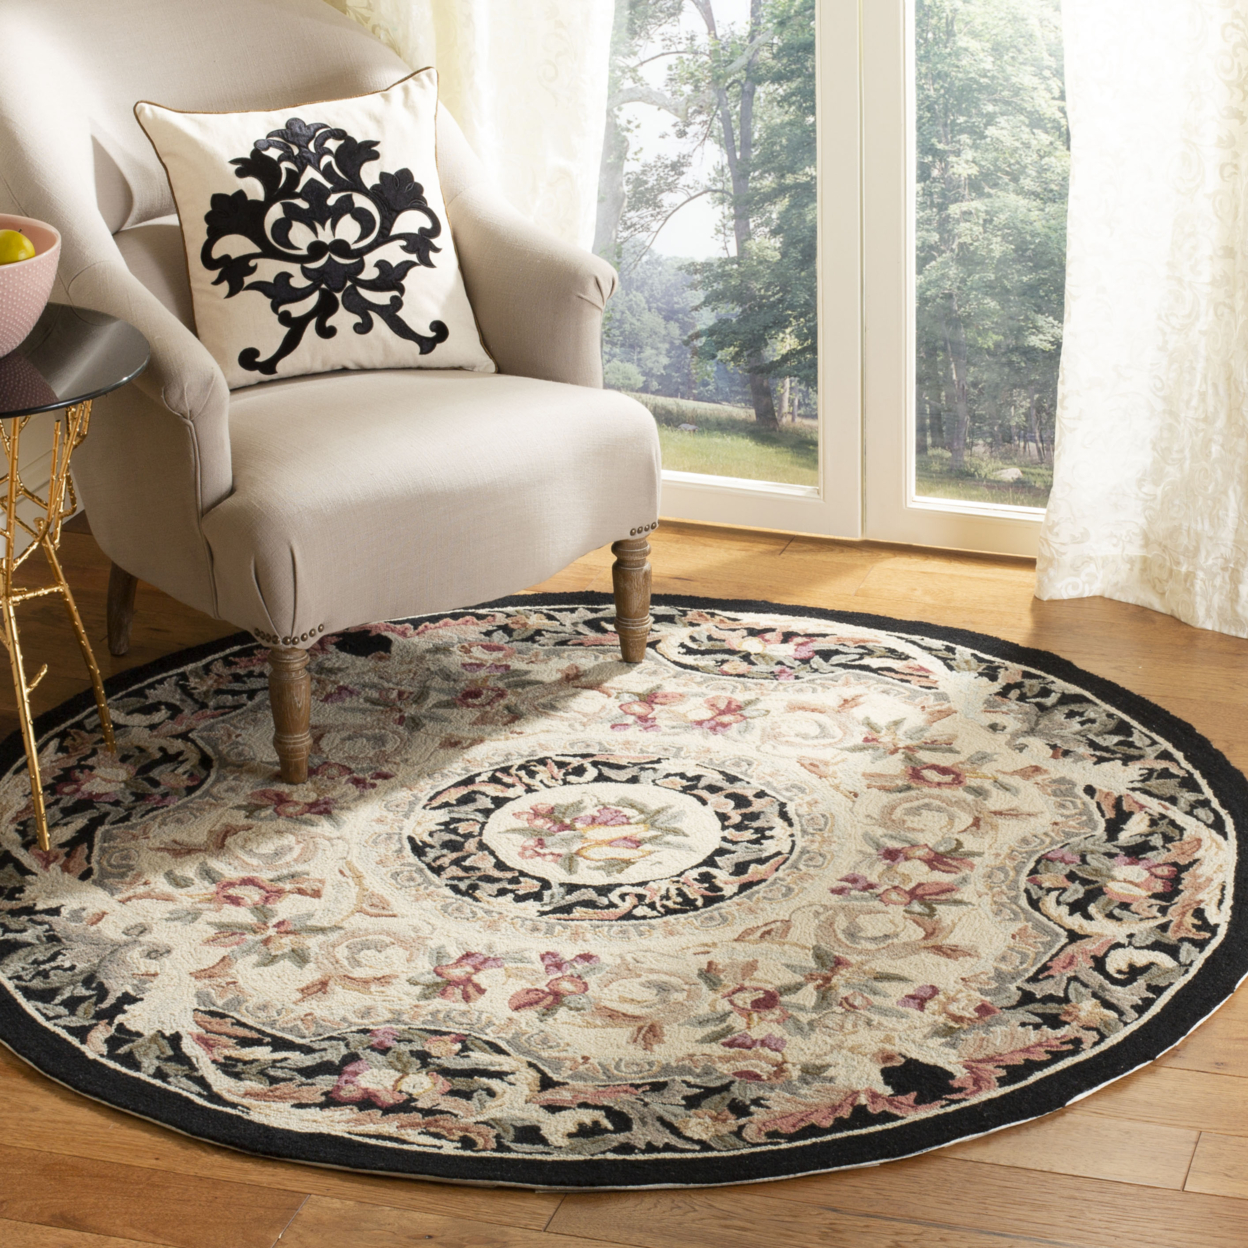 SAFAVIEH Chelsea Collection HK80A Hand-hooked Black Rug - 4' Round